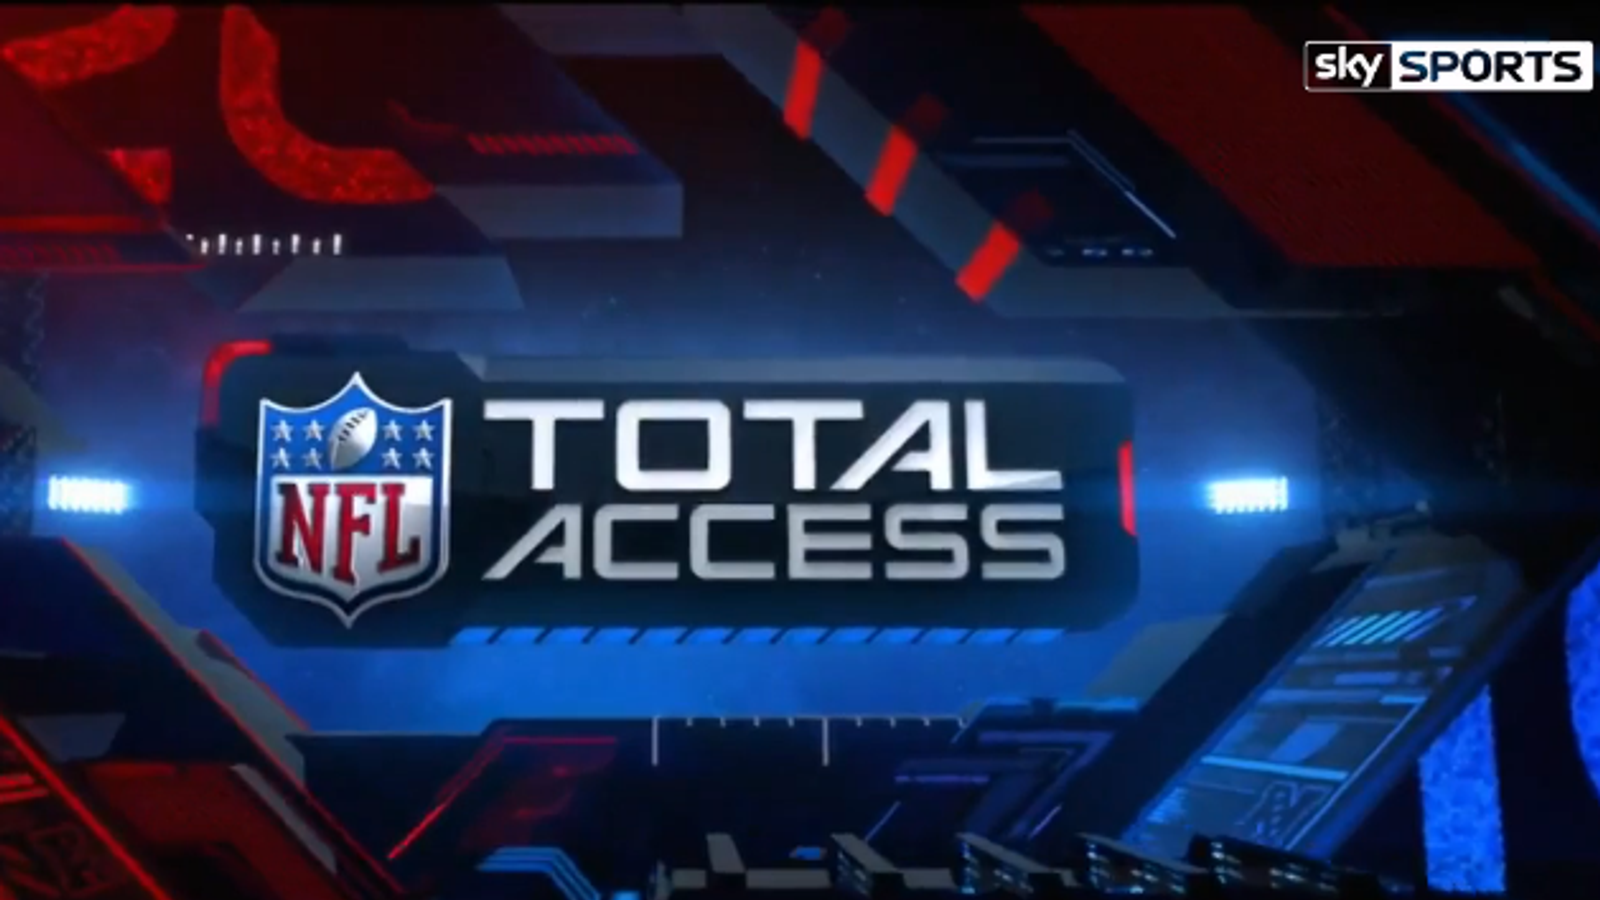 Total Access brings you the top NFL stories NFL News Sky Sports